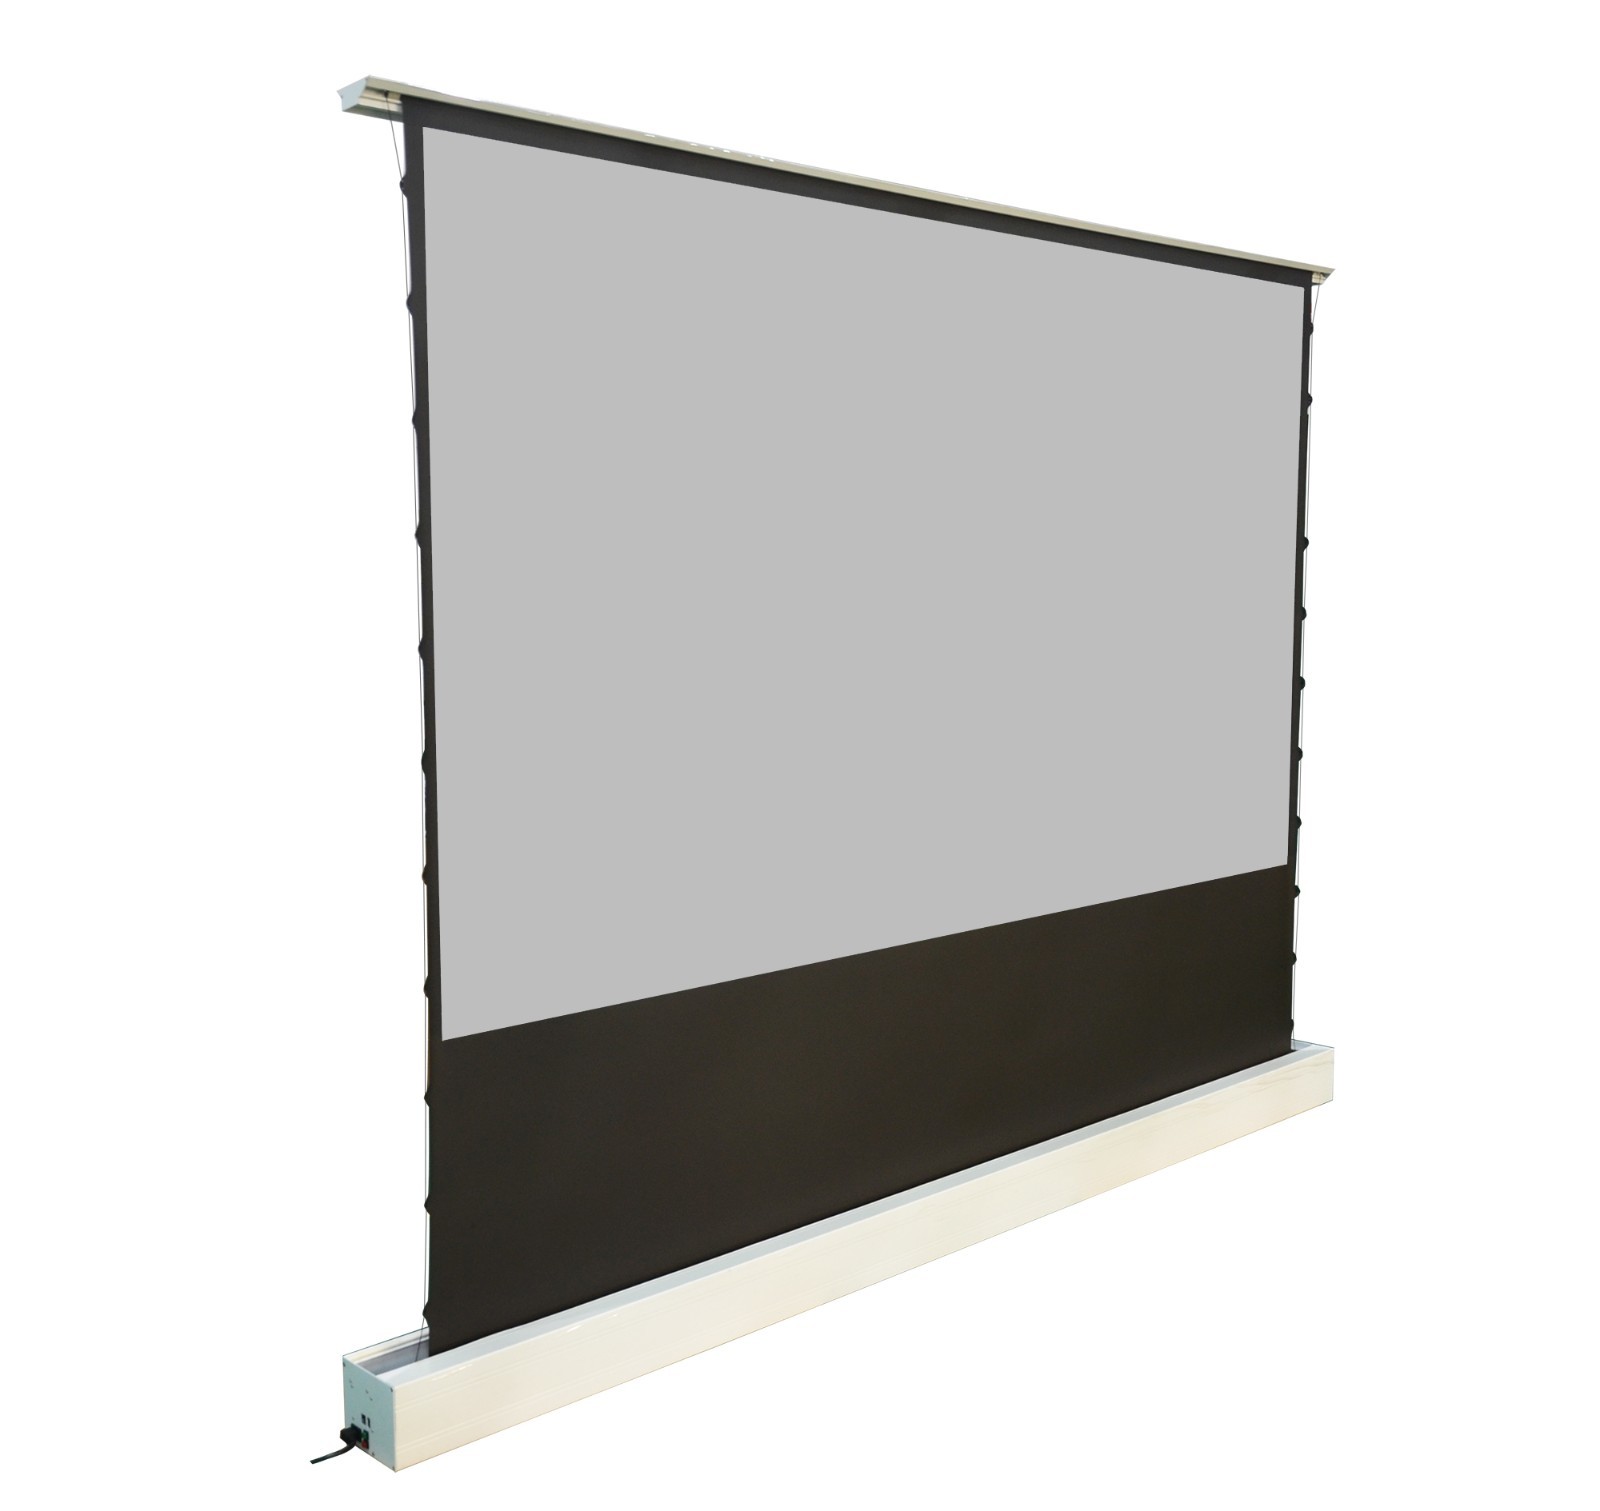 XY Screens rising pull up projector screen factory for household